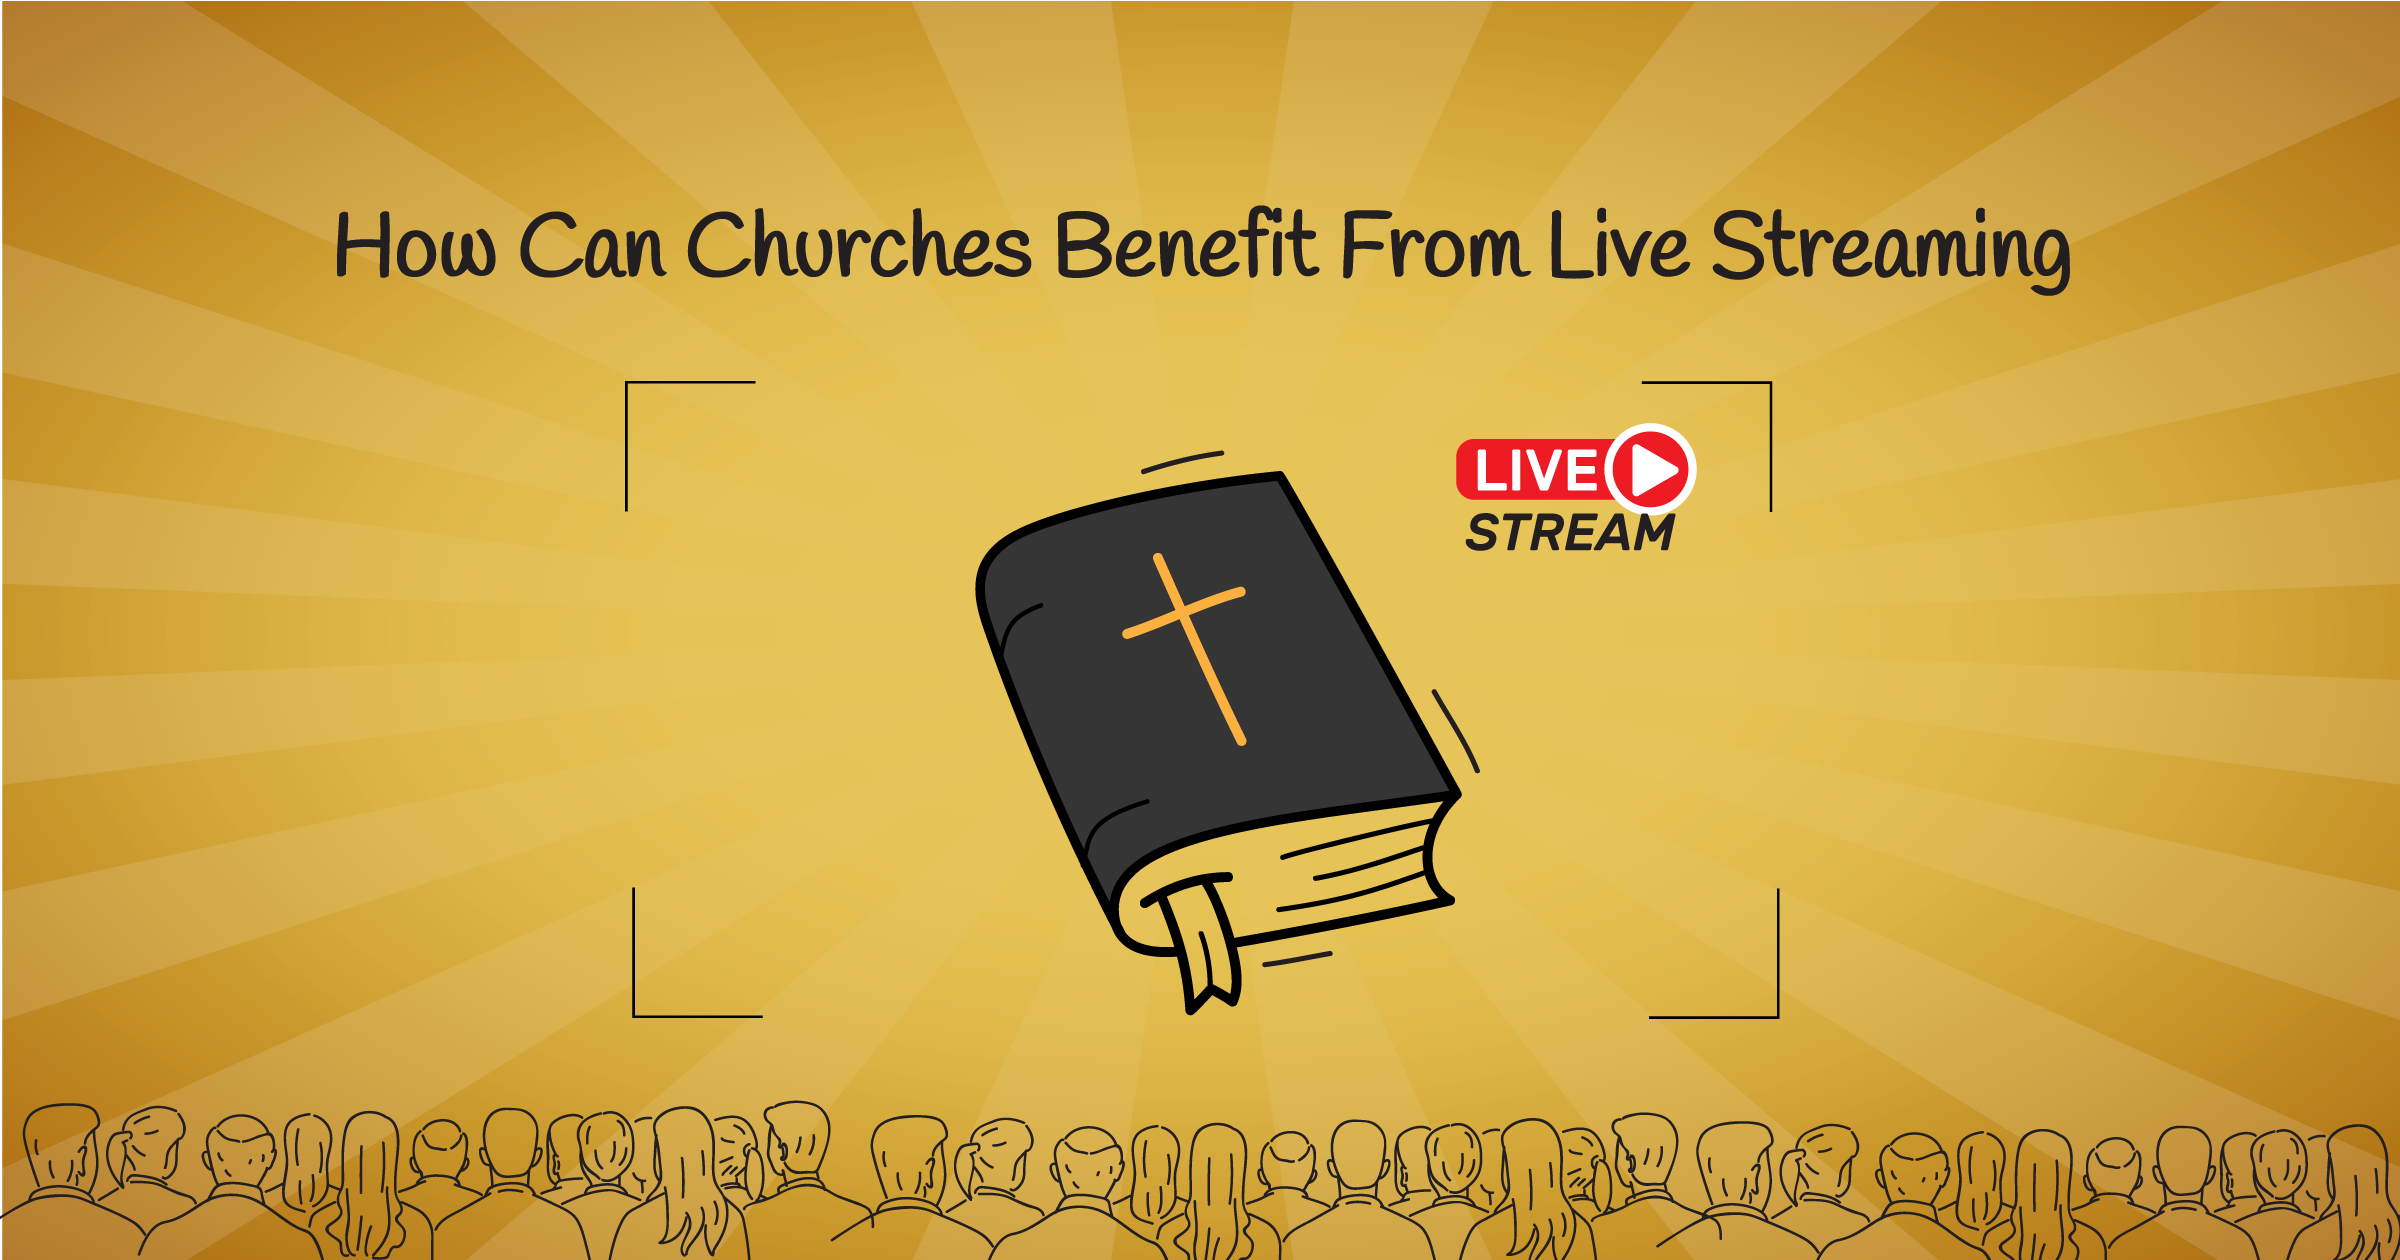 How-Can-Churches-Benefit-From-Live-Streaming-1